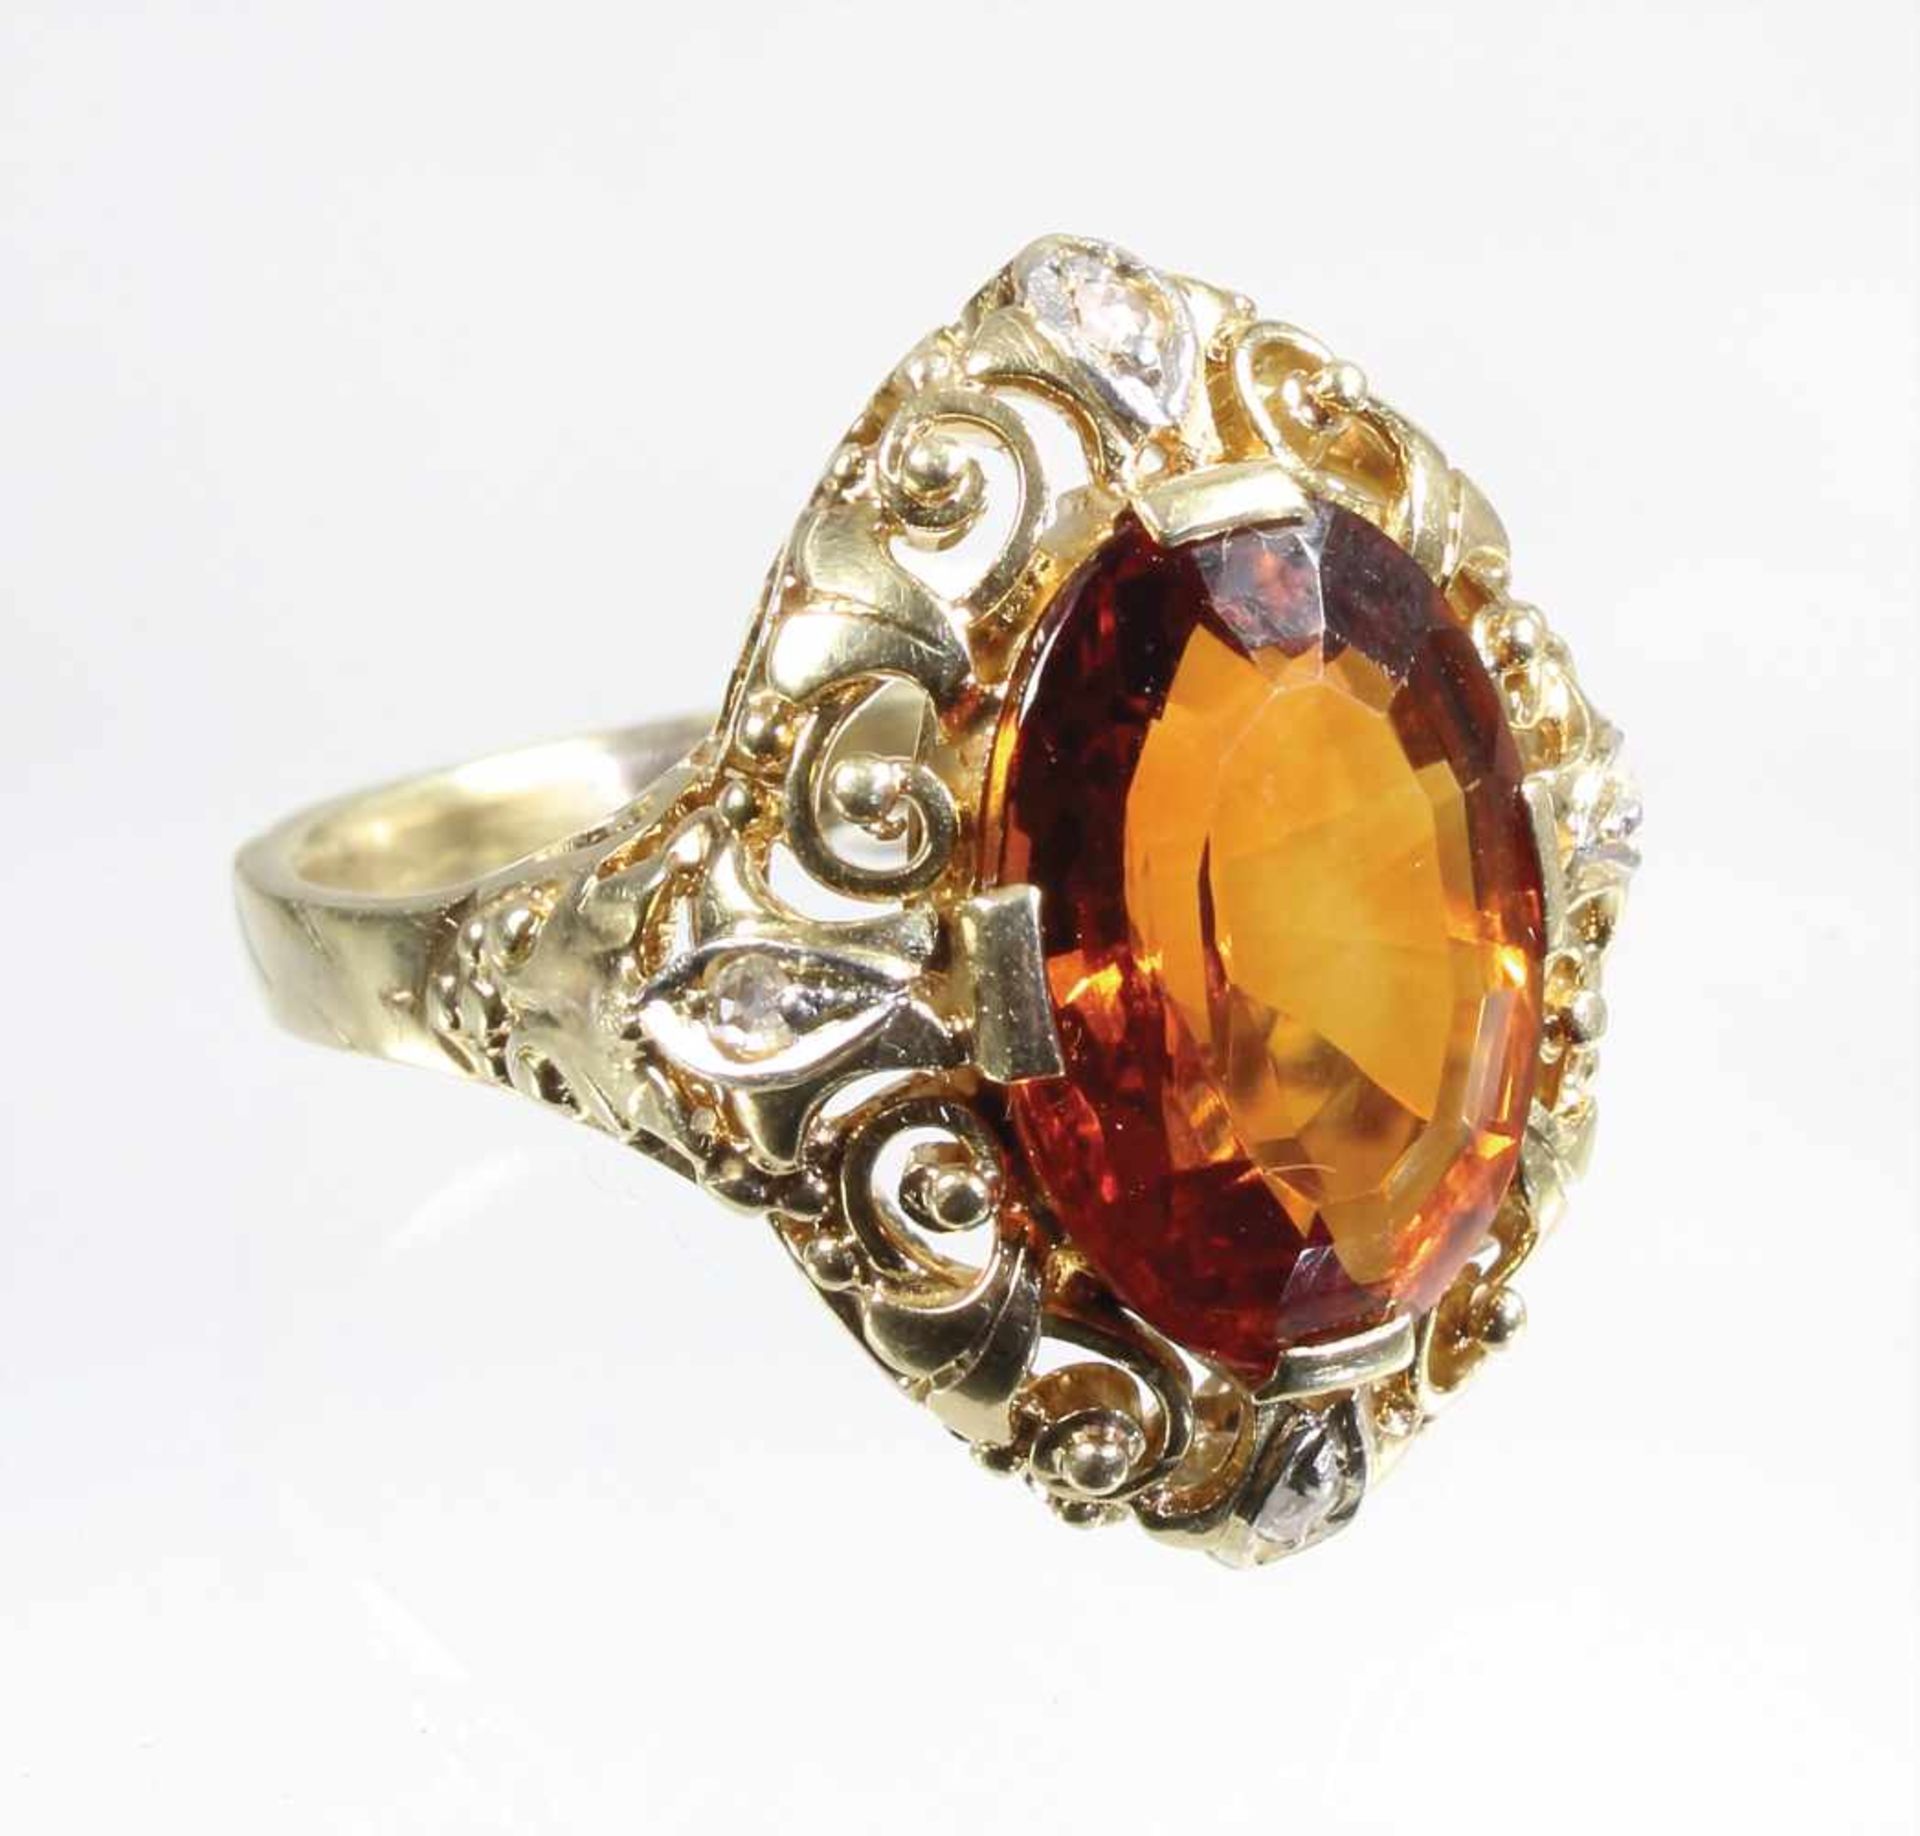 Ring Anfang 20.Jhd., GG 585/000, sig. RMO, wohl Citrin in leuchtend orangebrauner Farbe, ca. 6,0